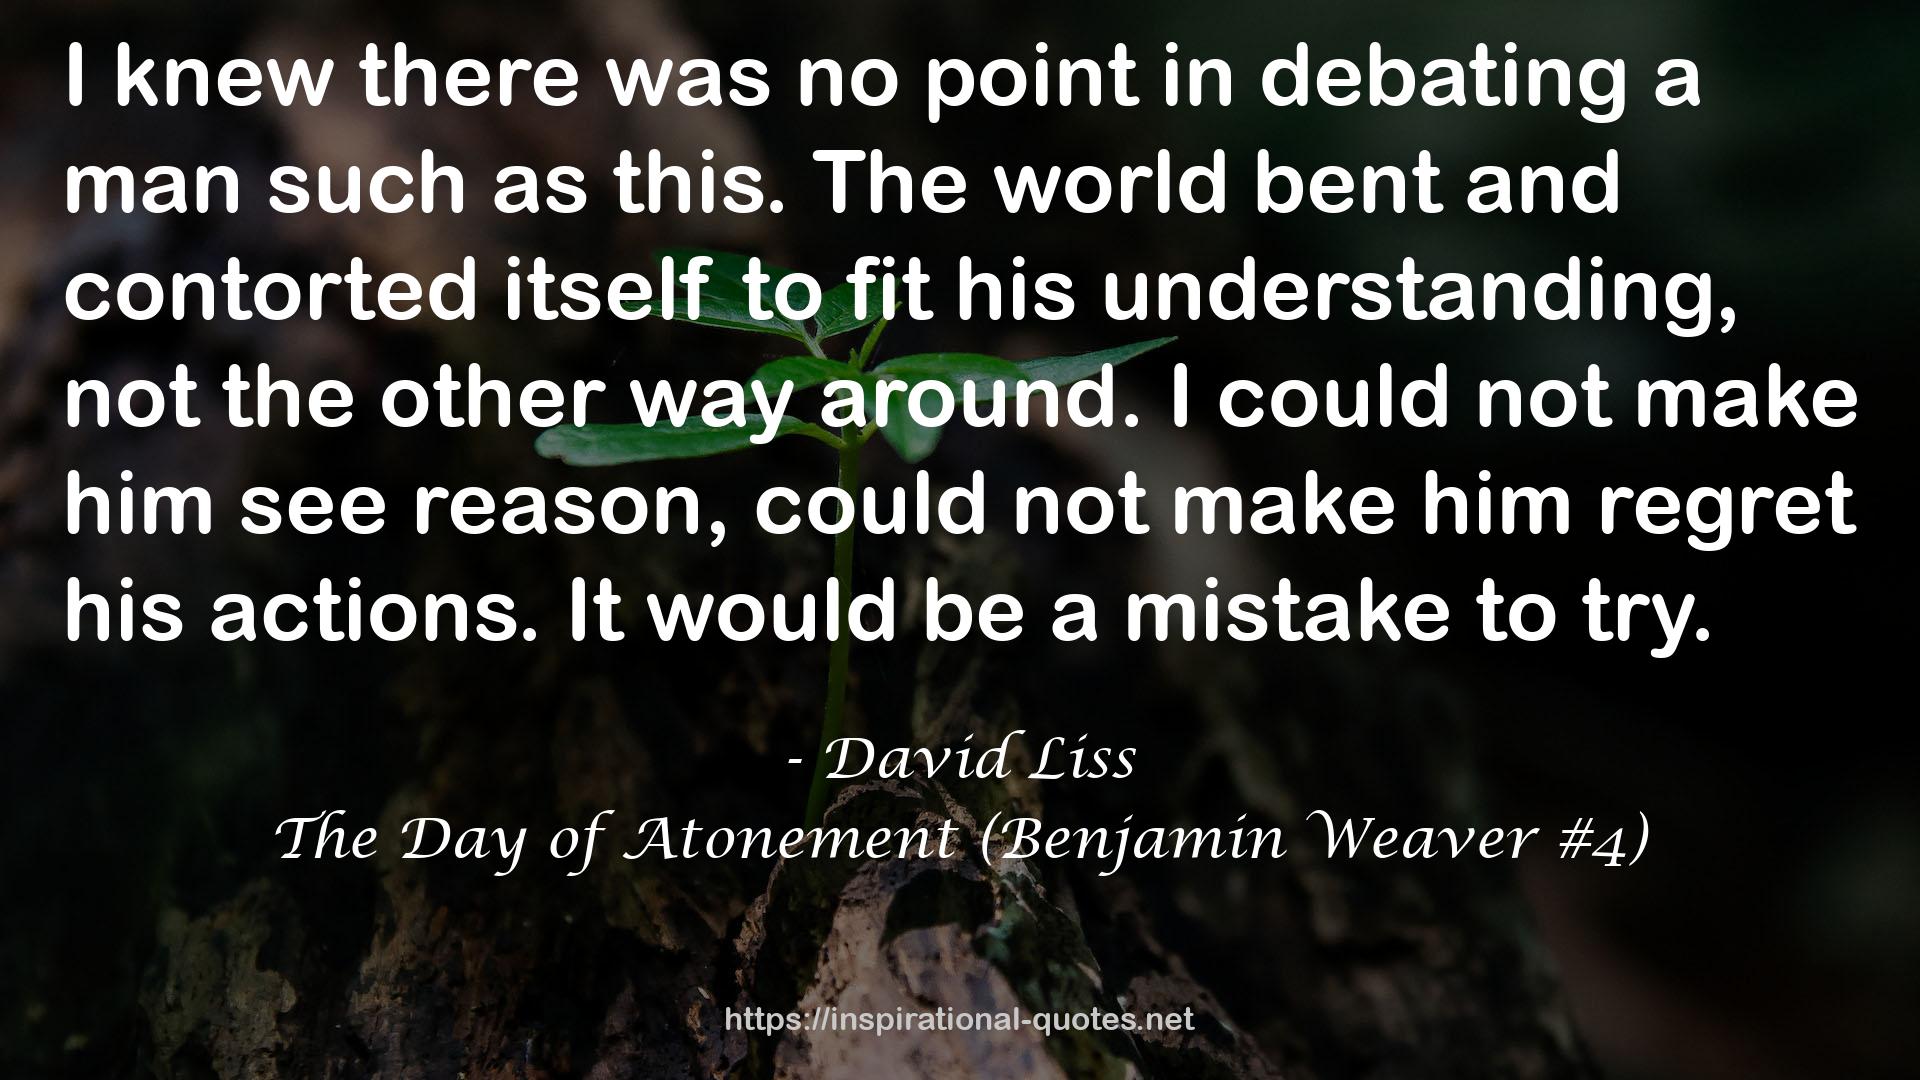 The Day of Atonement (Benjamin Weaver #4) QUOTES